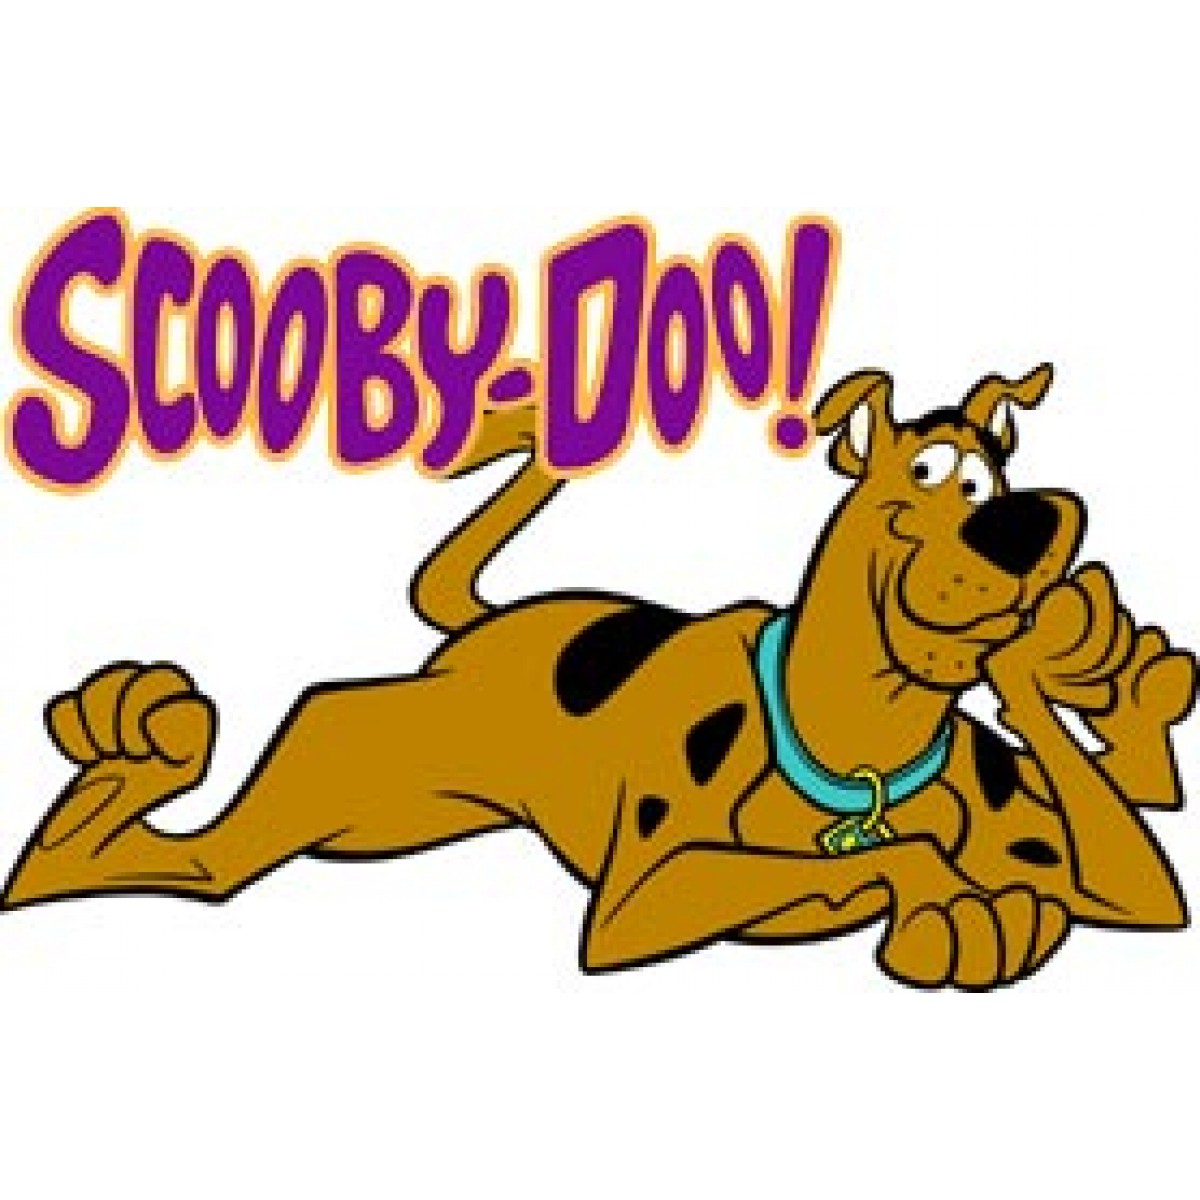 Download Scooby doo clipart letter, Scooby doo letter Transparent ...